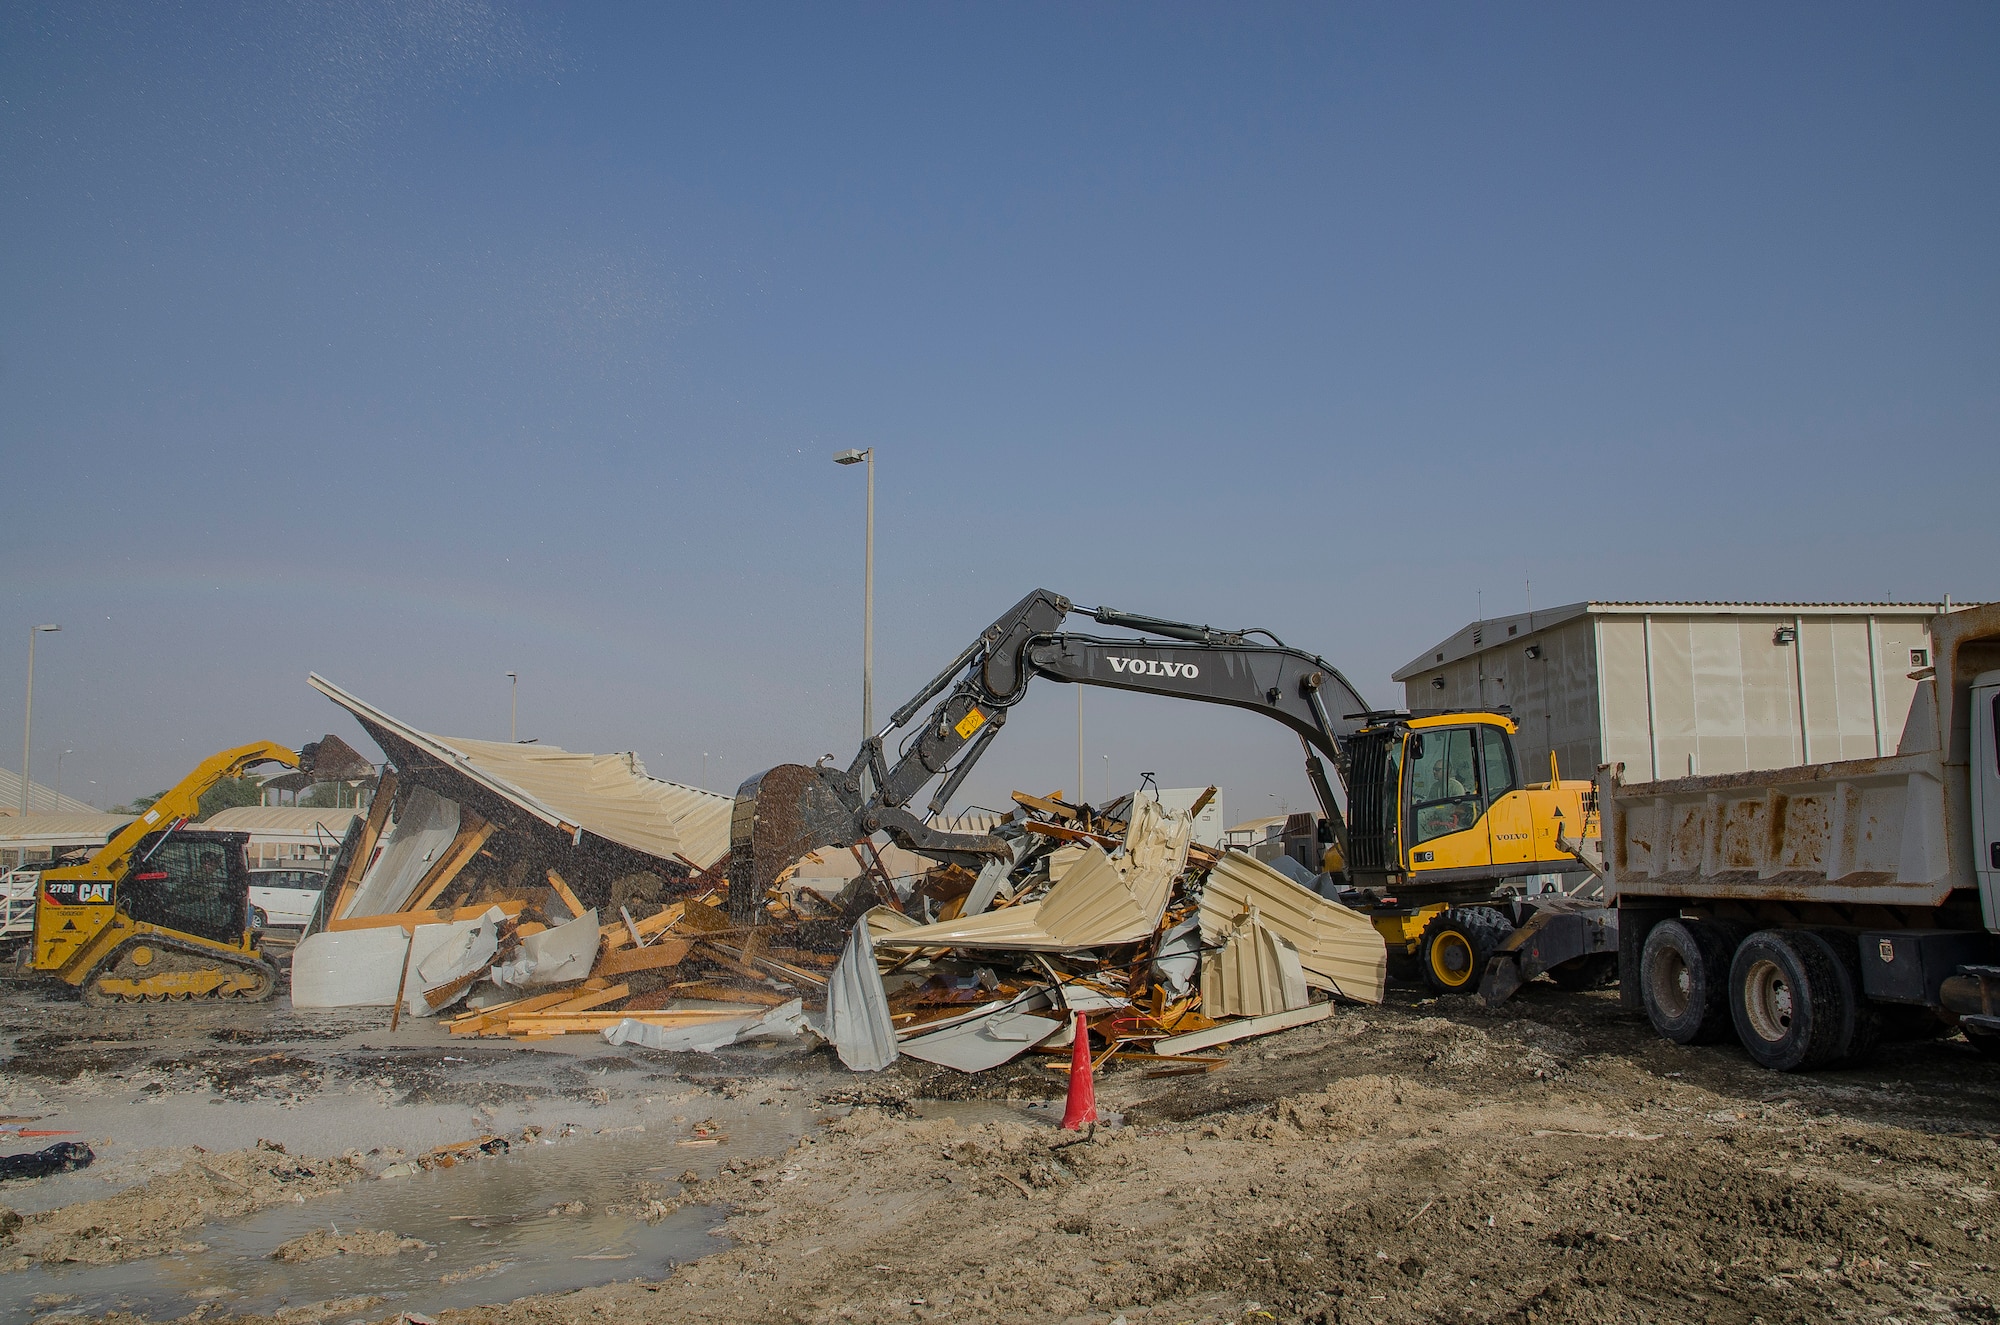 Staff Sgt. Nicholas Warkocz, pavements and heavy equipment operator, uses an excavator to remove debris from a demolished building May 9, 2018, at Al Dhafra Air Base, United Arab Emirates. Pavement and construction equipment airmen operate and maintain heavy construction equipment, and can also detonate explosives in order to care for and create the facilities we need most. (U.S. Air National Guard photo by Staff Sgt. Ross A. Whitley)